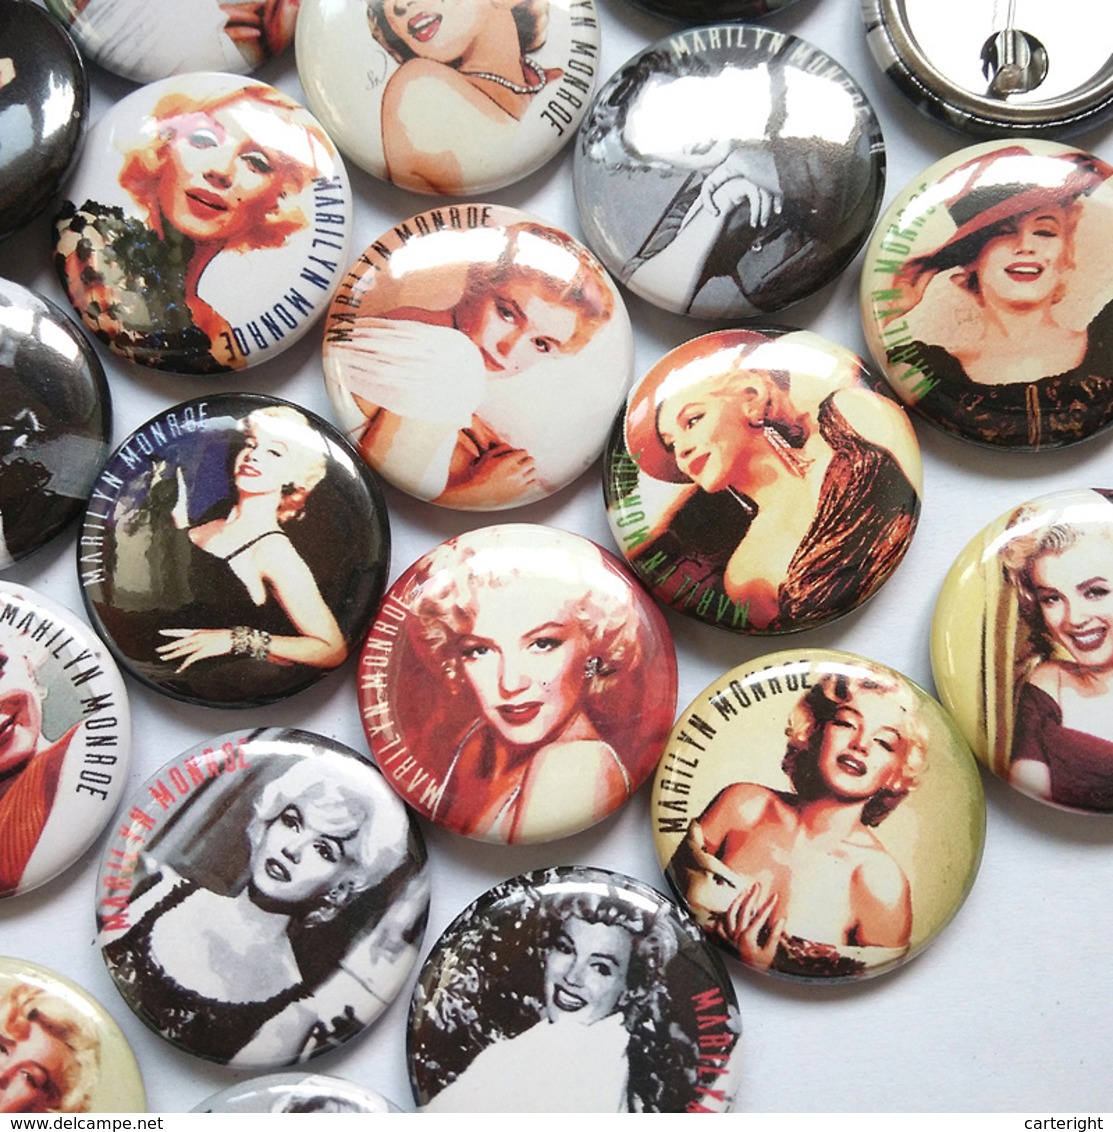 rock and roll music fan ART BADGE BUTTON PIN SET 5 (1inch/25mm diameter) 35 DIFF